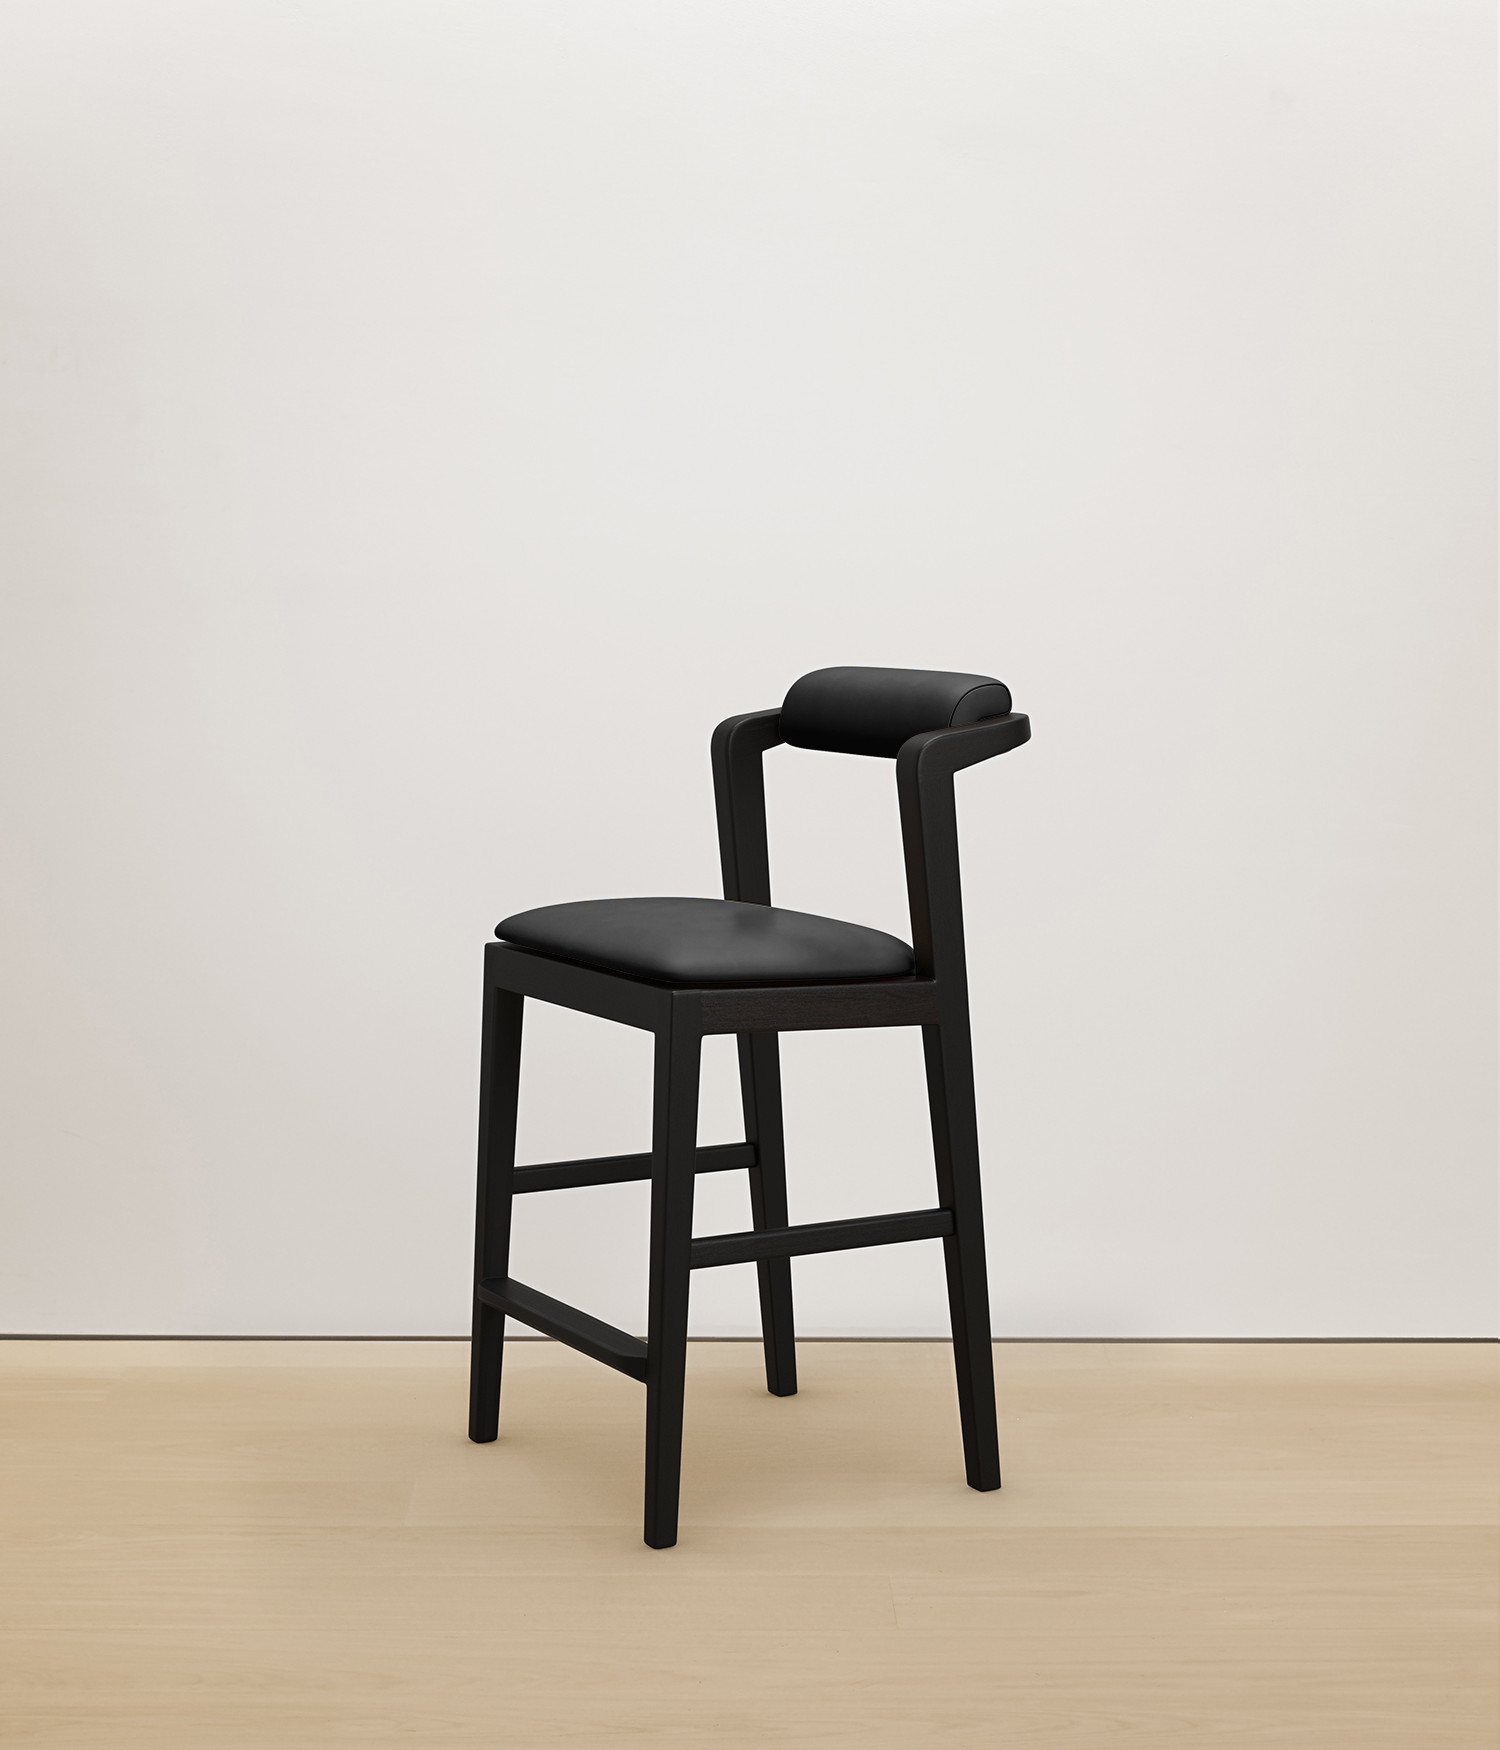  black-stained-oak stool with black color upholstered seat